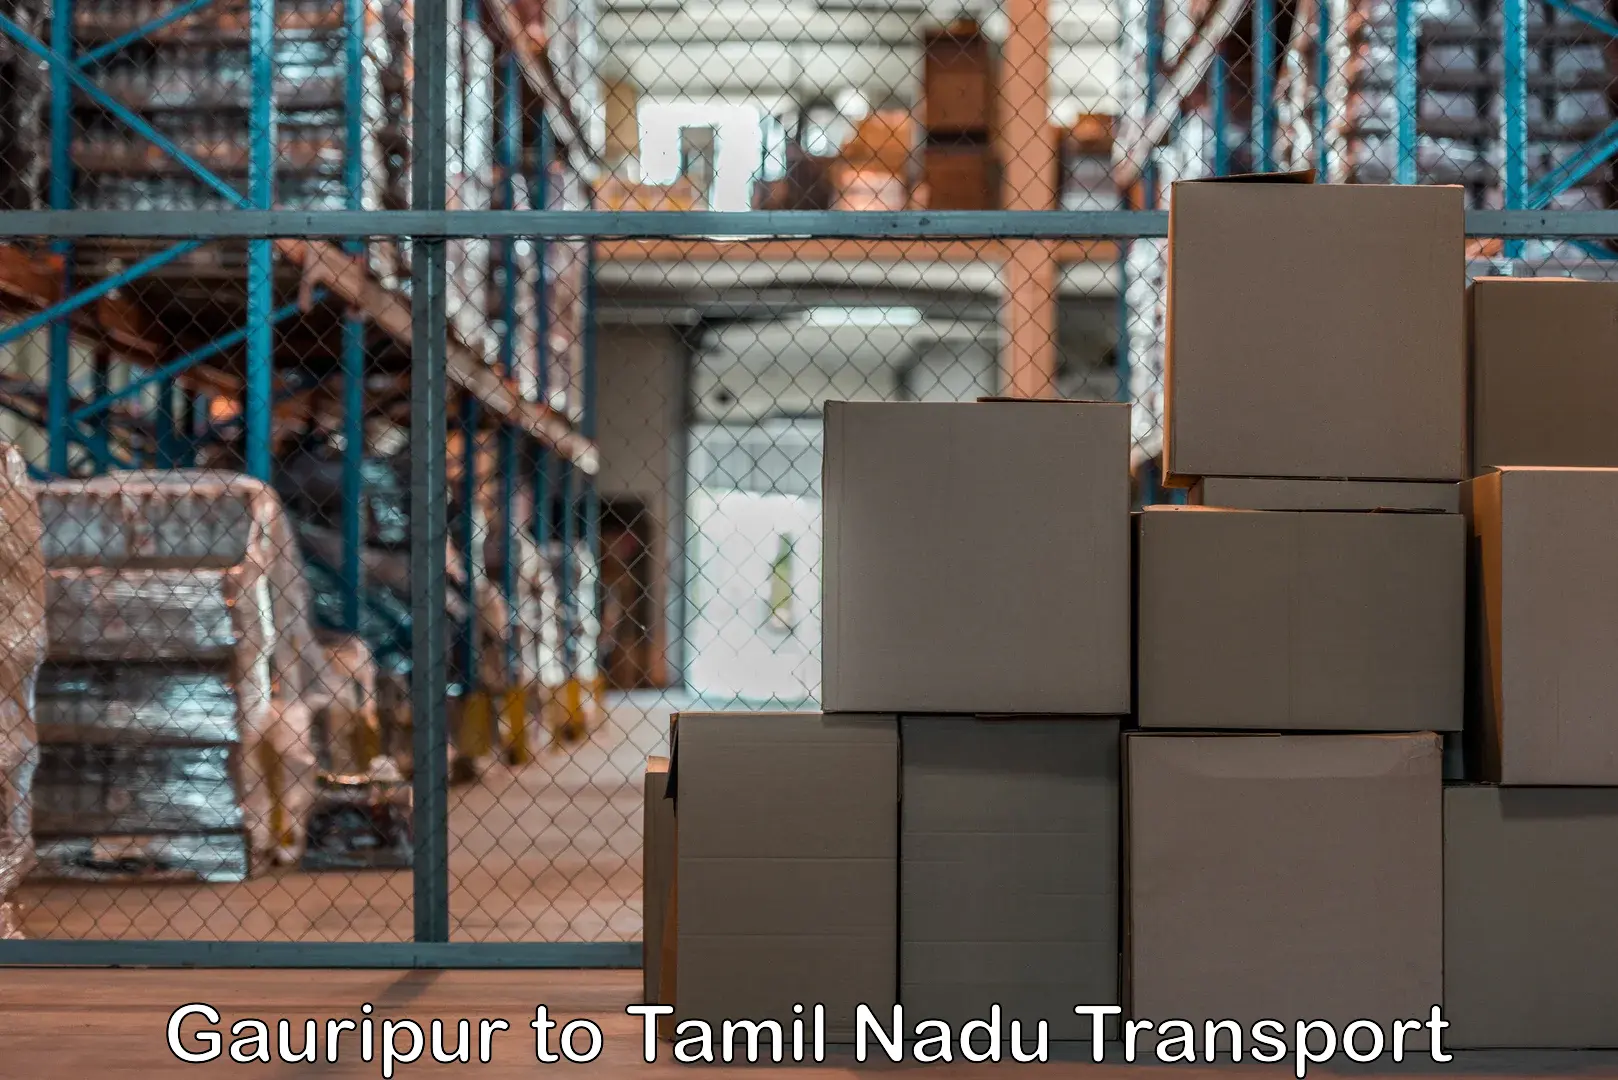 Container transport service Gauripur to Vellore Institute of Technology